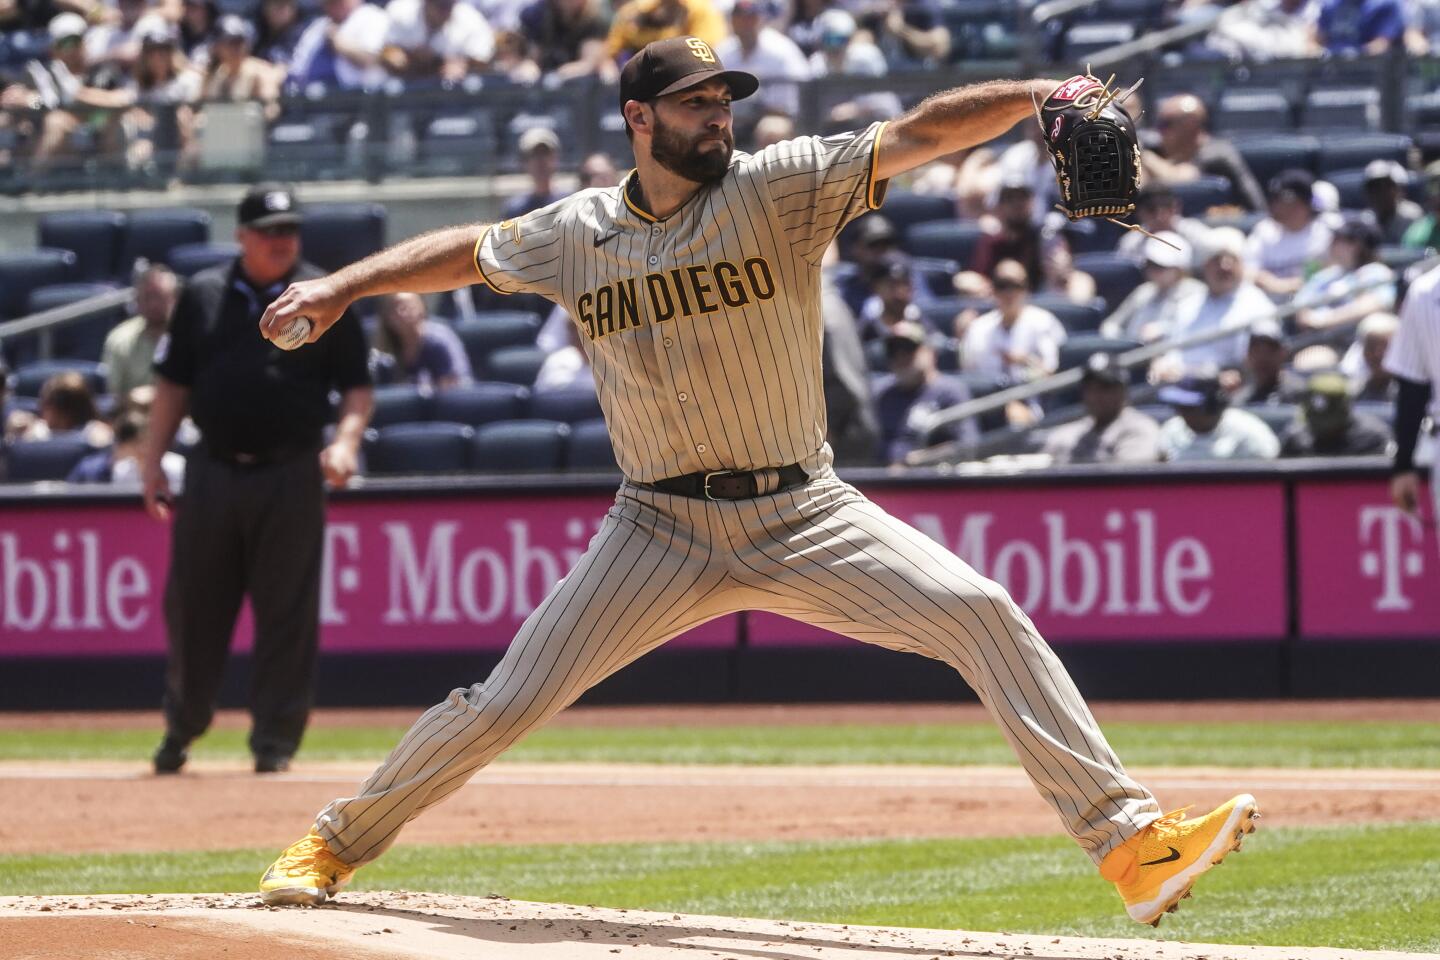 Padres on deck: Back home to face the Cubs - The San Diego Union